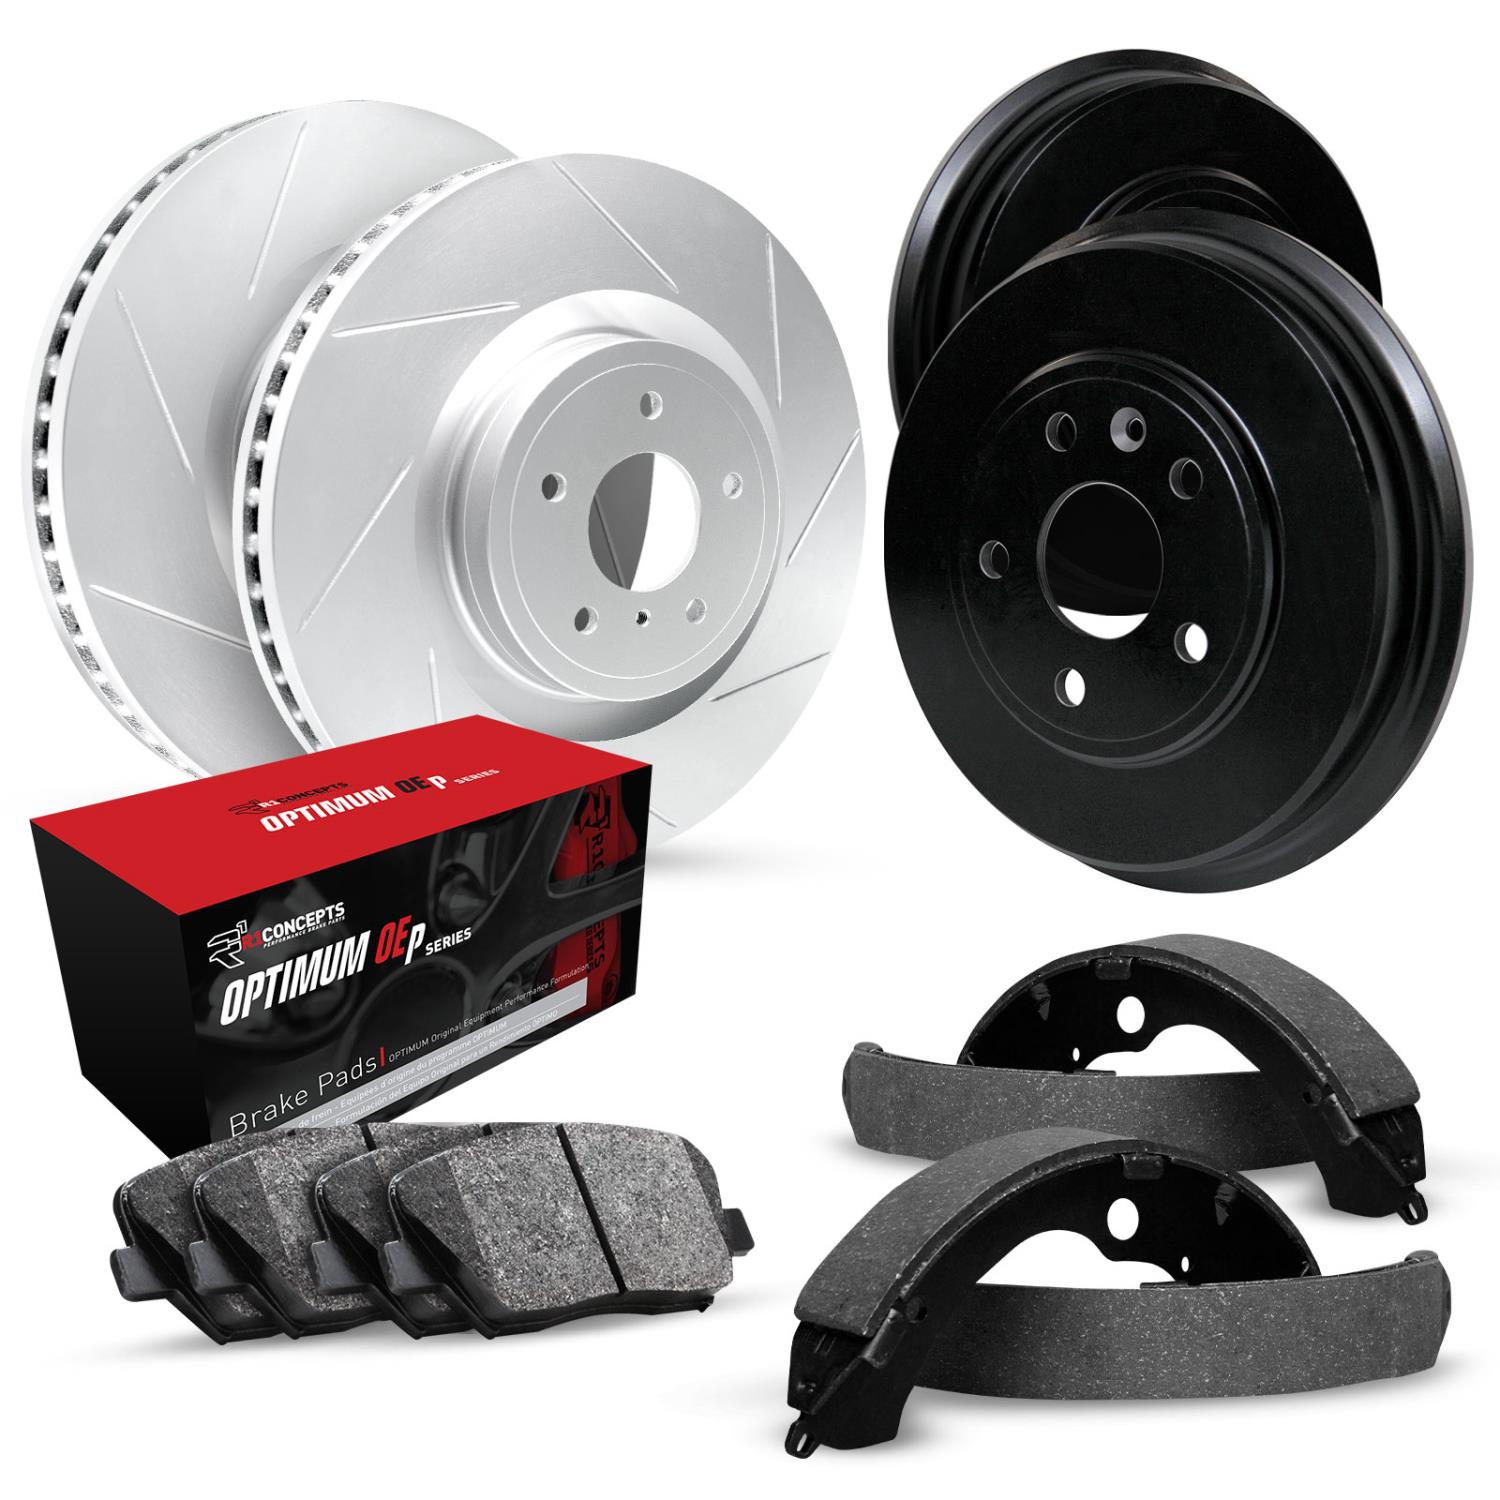 GEO-Carbon Slotted Brake Rotor & Drum Set w/Optimum OE Pads & Shoes, 1981-1989 GM, Position: Front & Rear